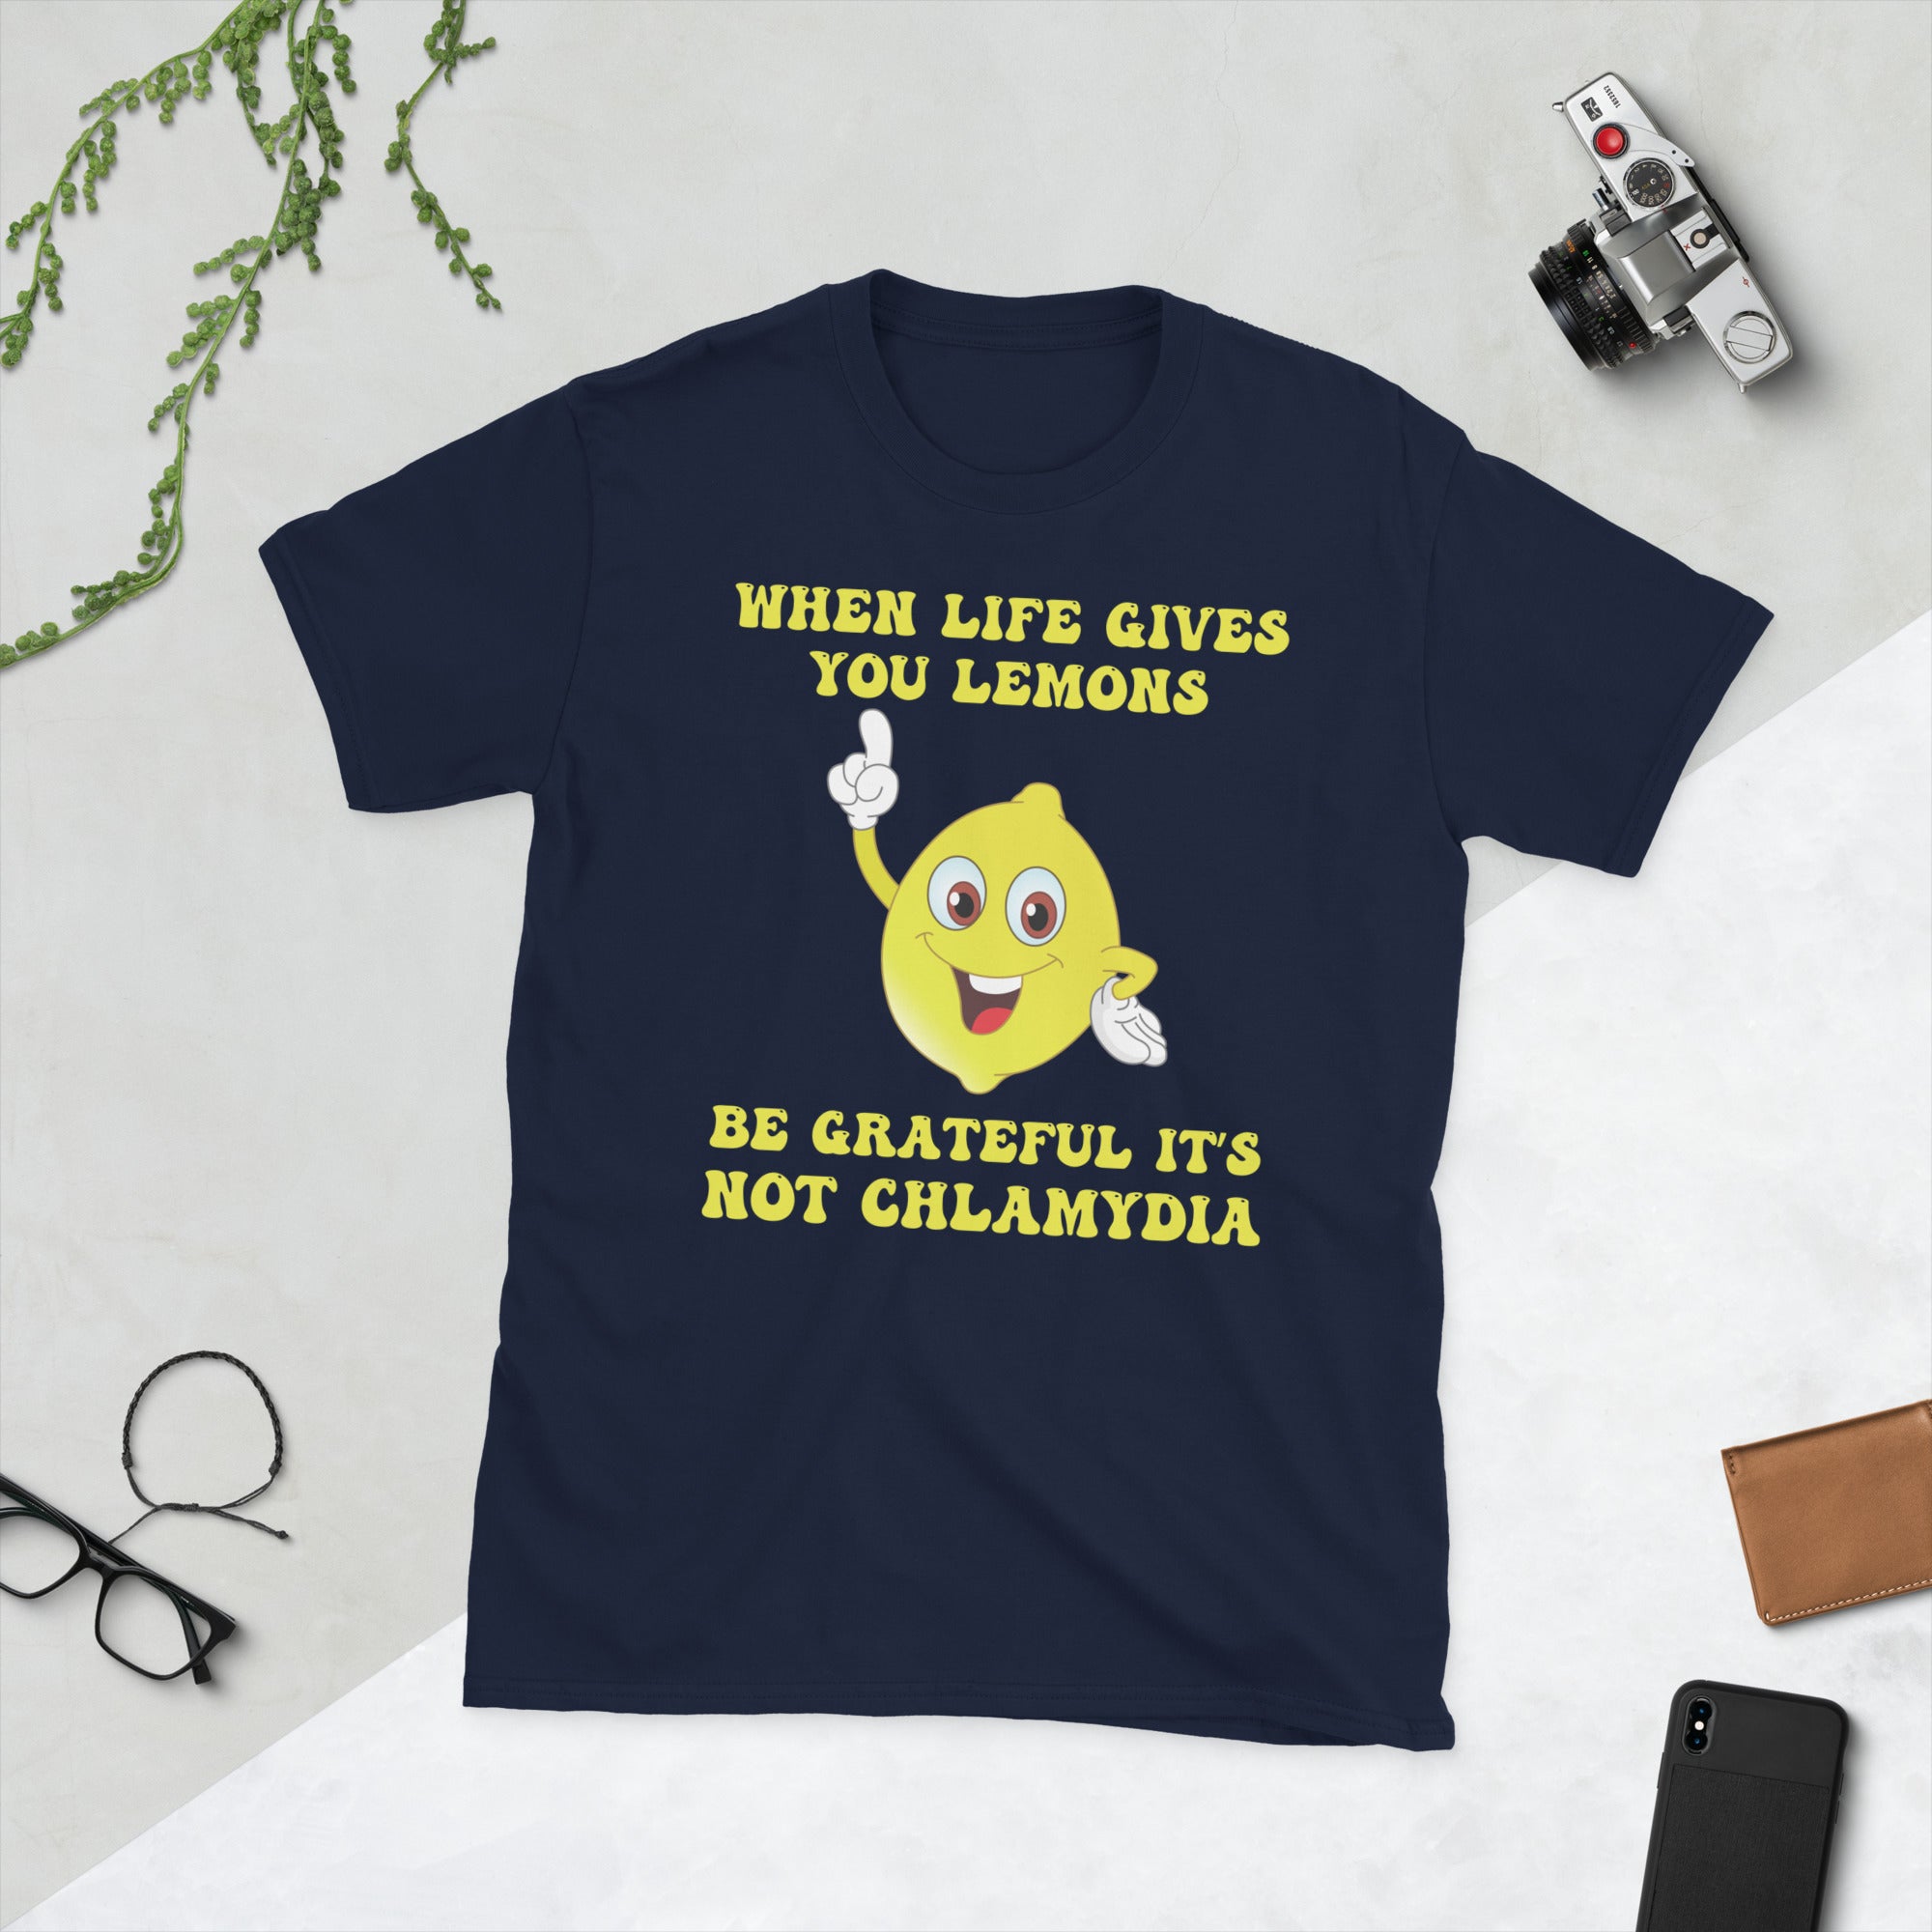 When Life Gives You Lemons Be Grateful Its Not Chlamydia, Inappropriate Shirt, Sarcastic TShirt, Funny Meme Tee, Ironic Shirt, Offensive Tee - Madeinsea©